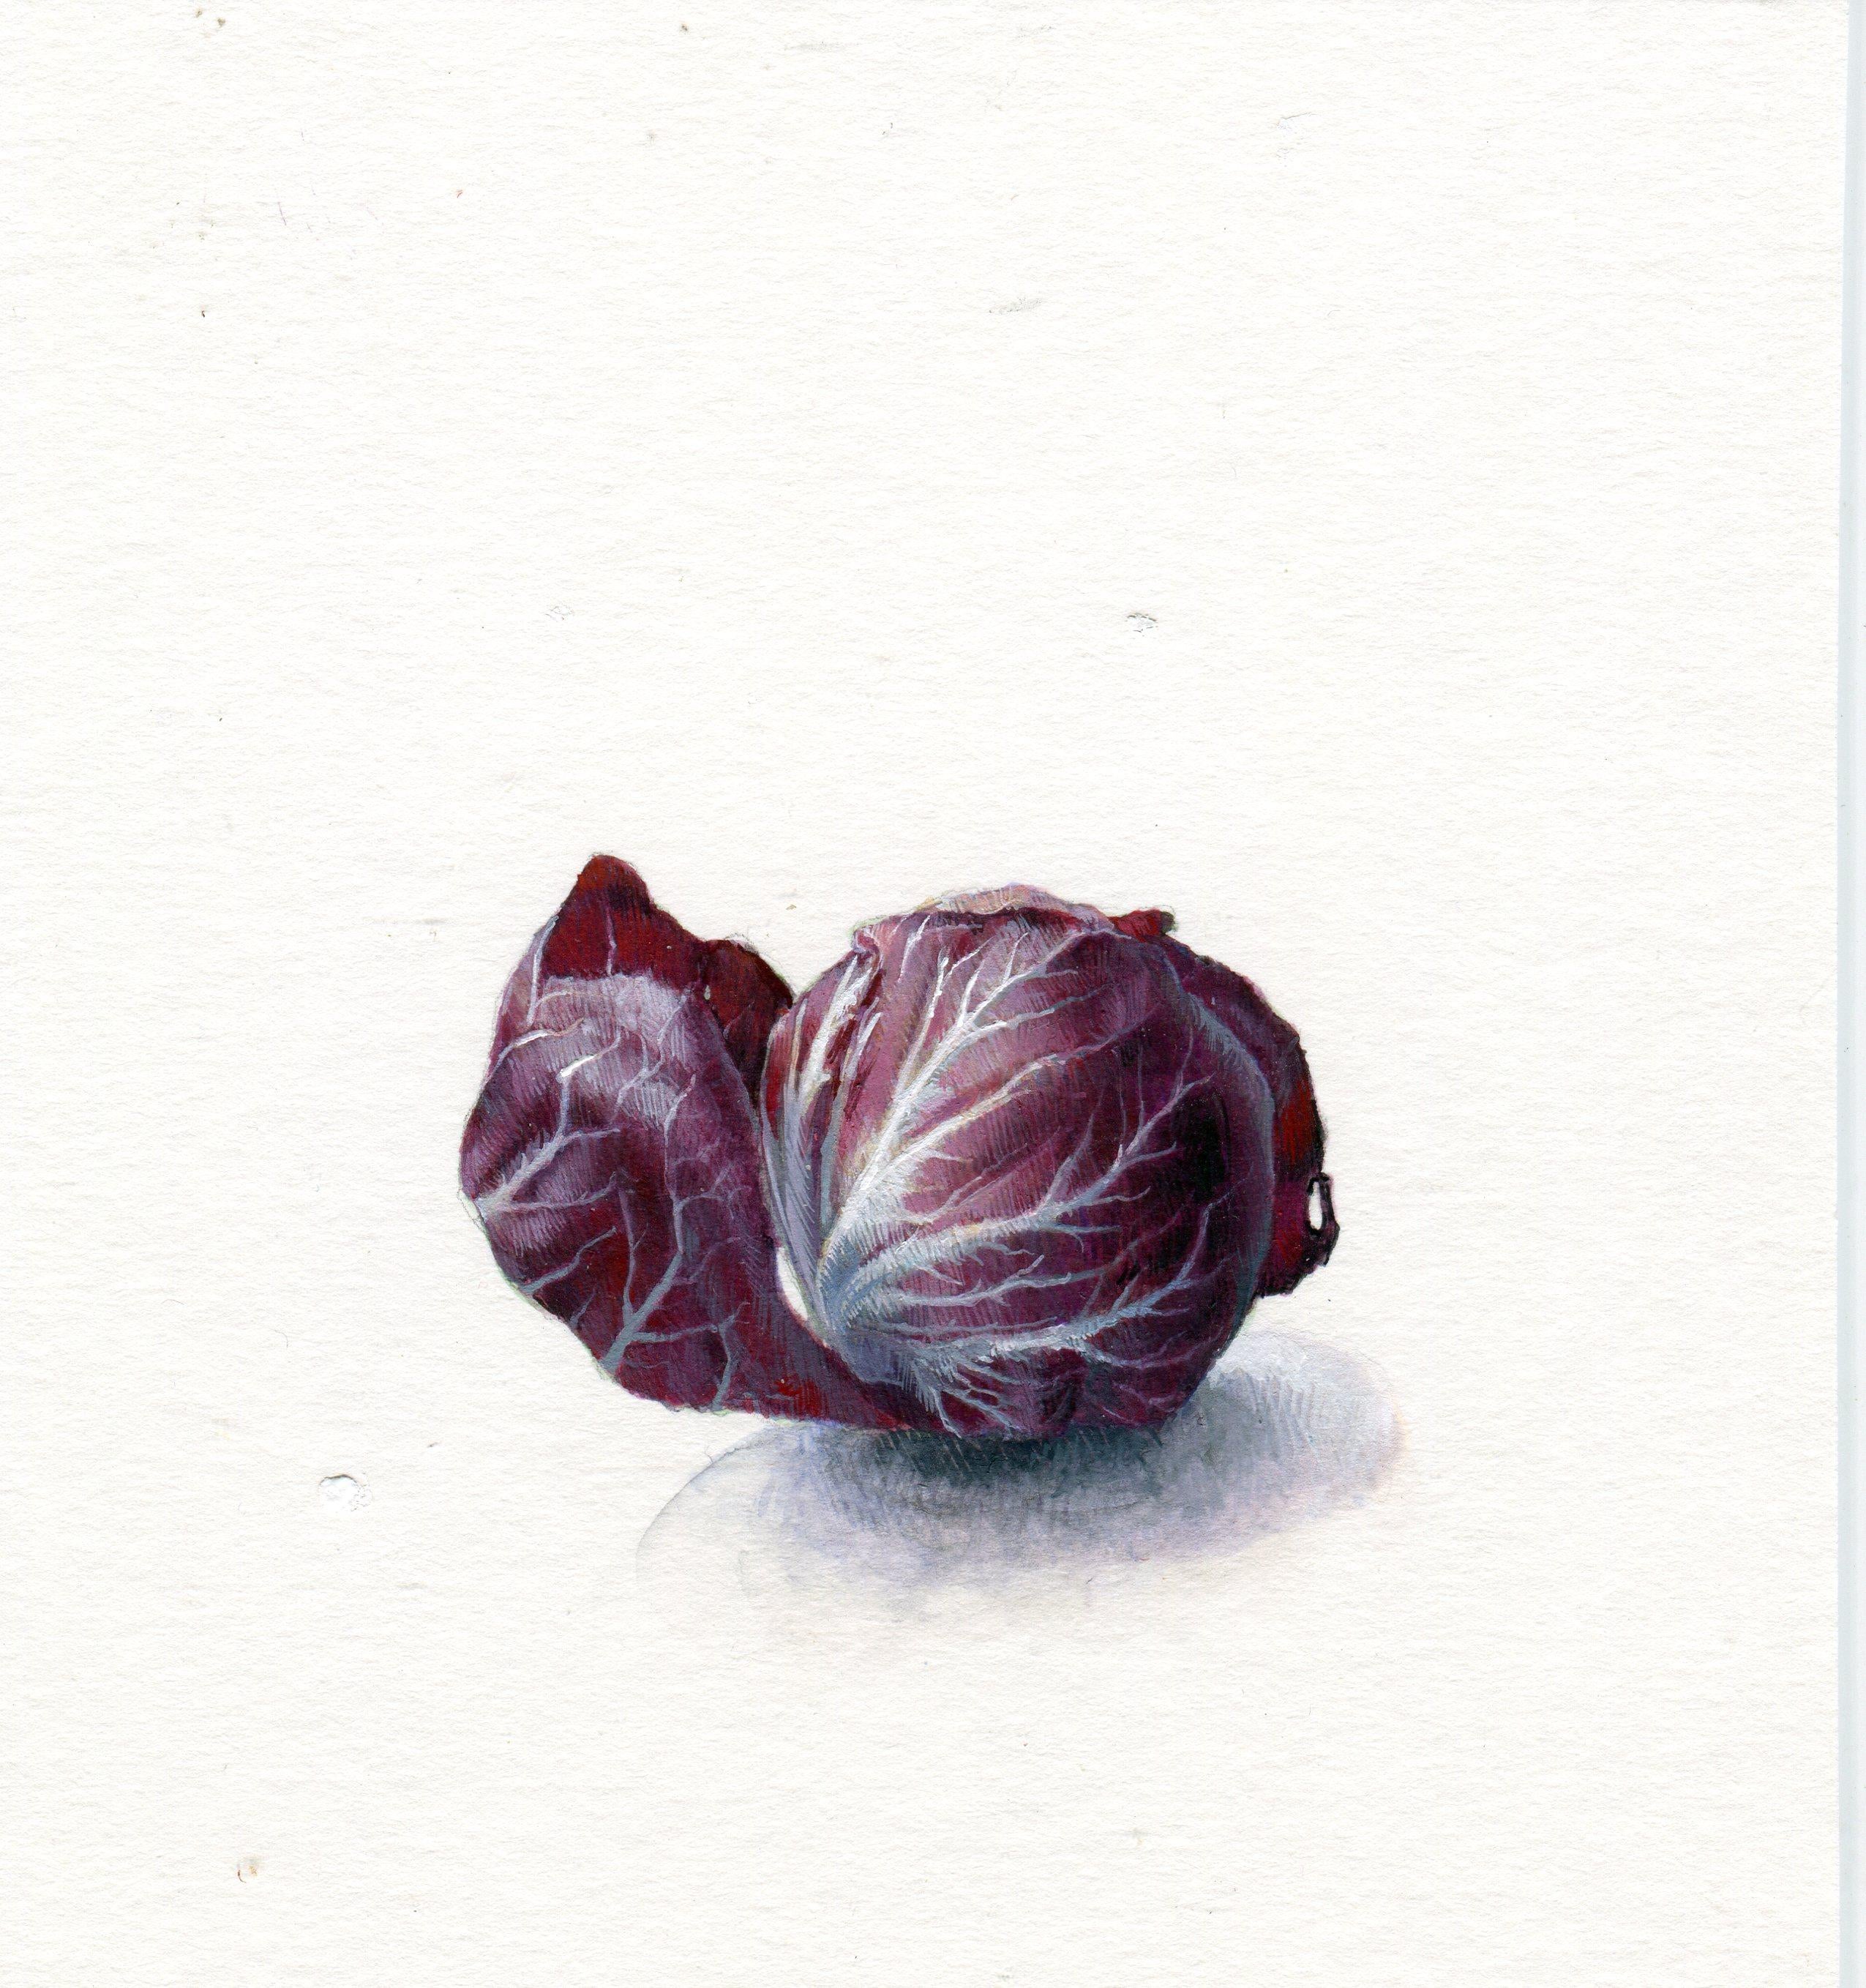 Dina Brodsky elevates and personifies her subject in her realist gouache still-life "Radicchio." Though diminutive in scale, Brodsky's attention to detail lends singularity to the vegetable. A thin network of pearly white veins stretches across the